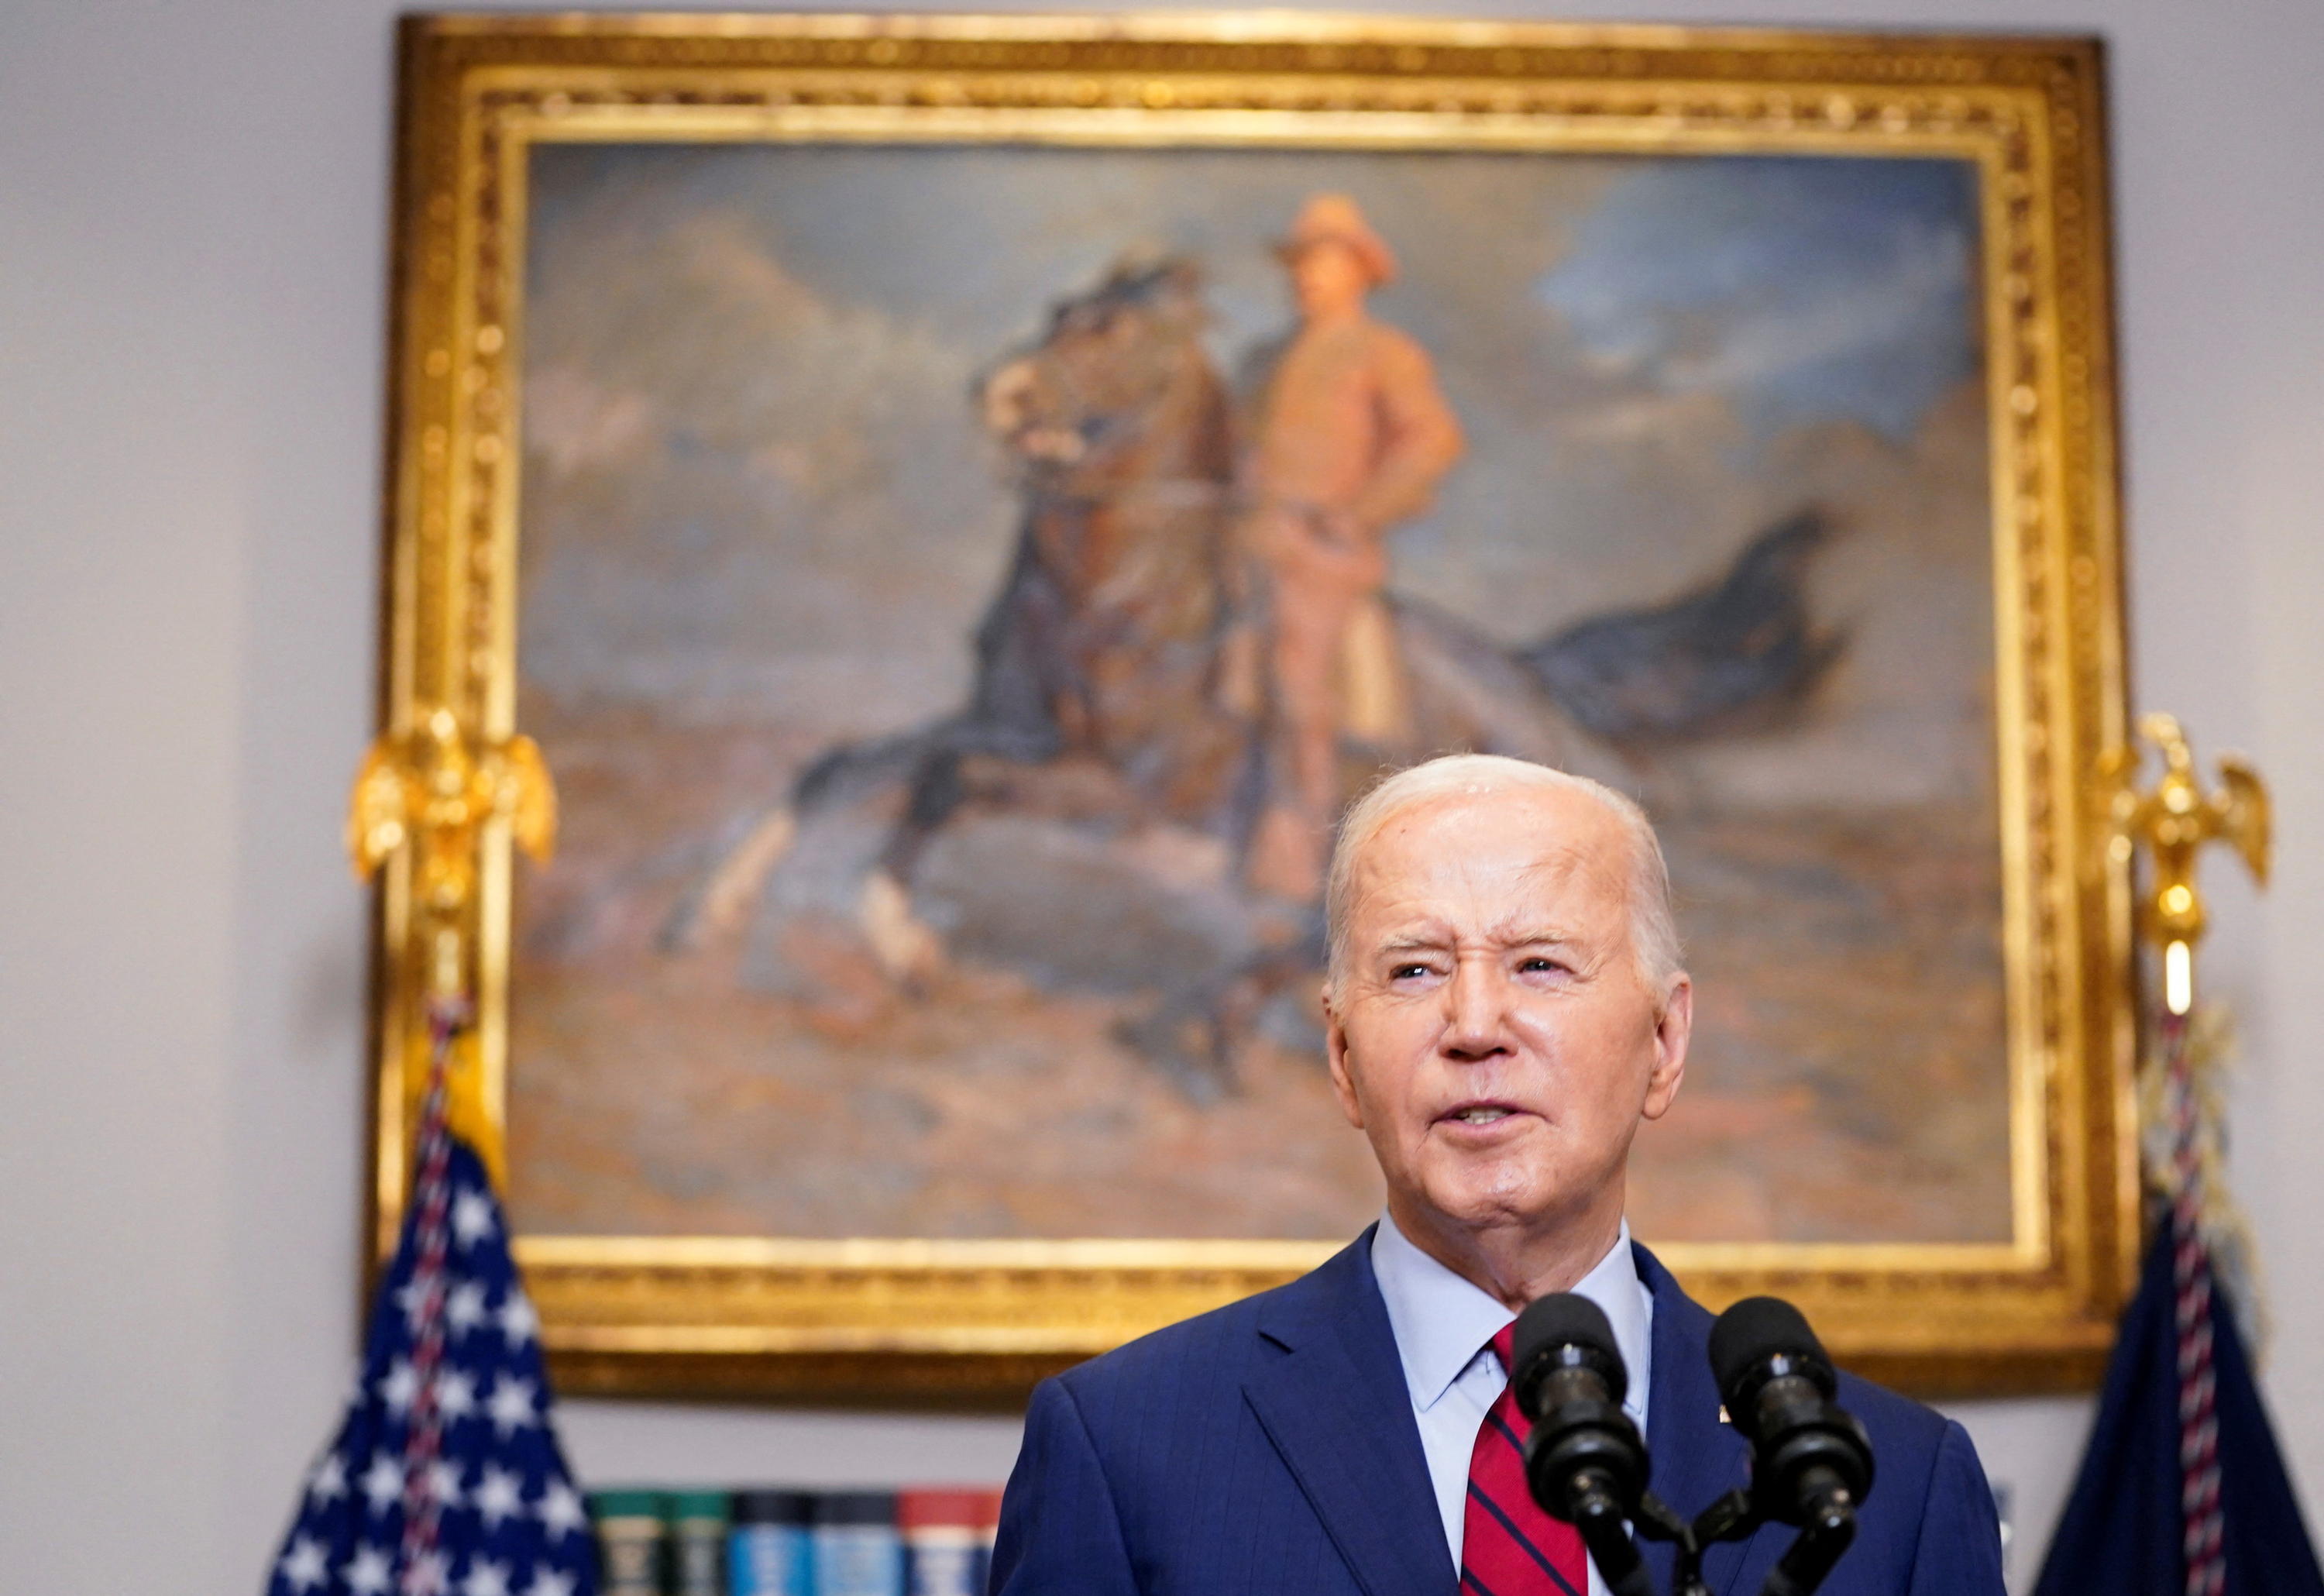 Joe Biden speaks in the Roosevelt Room at the White House in Washington, DC, on May 2.